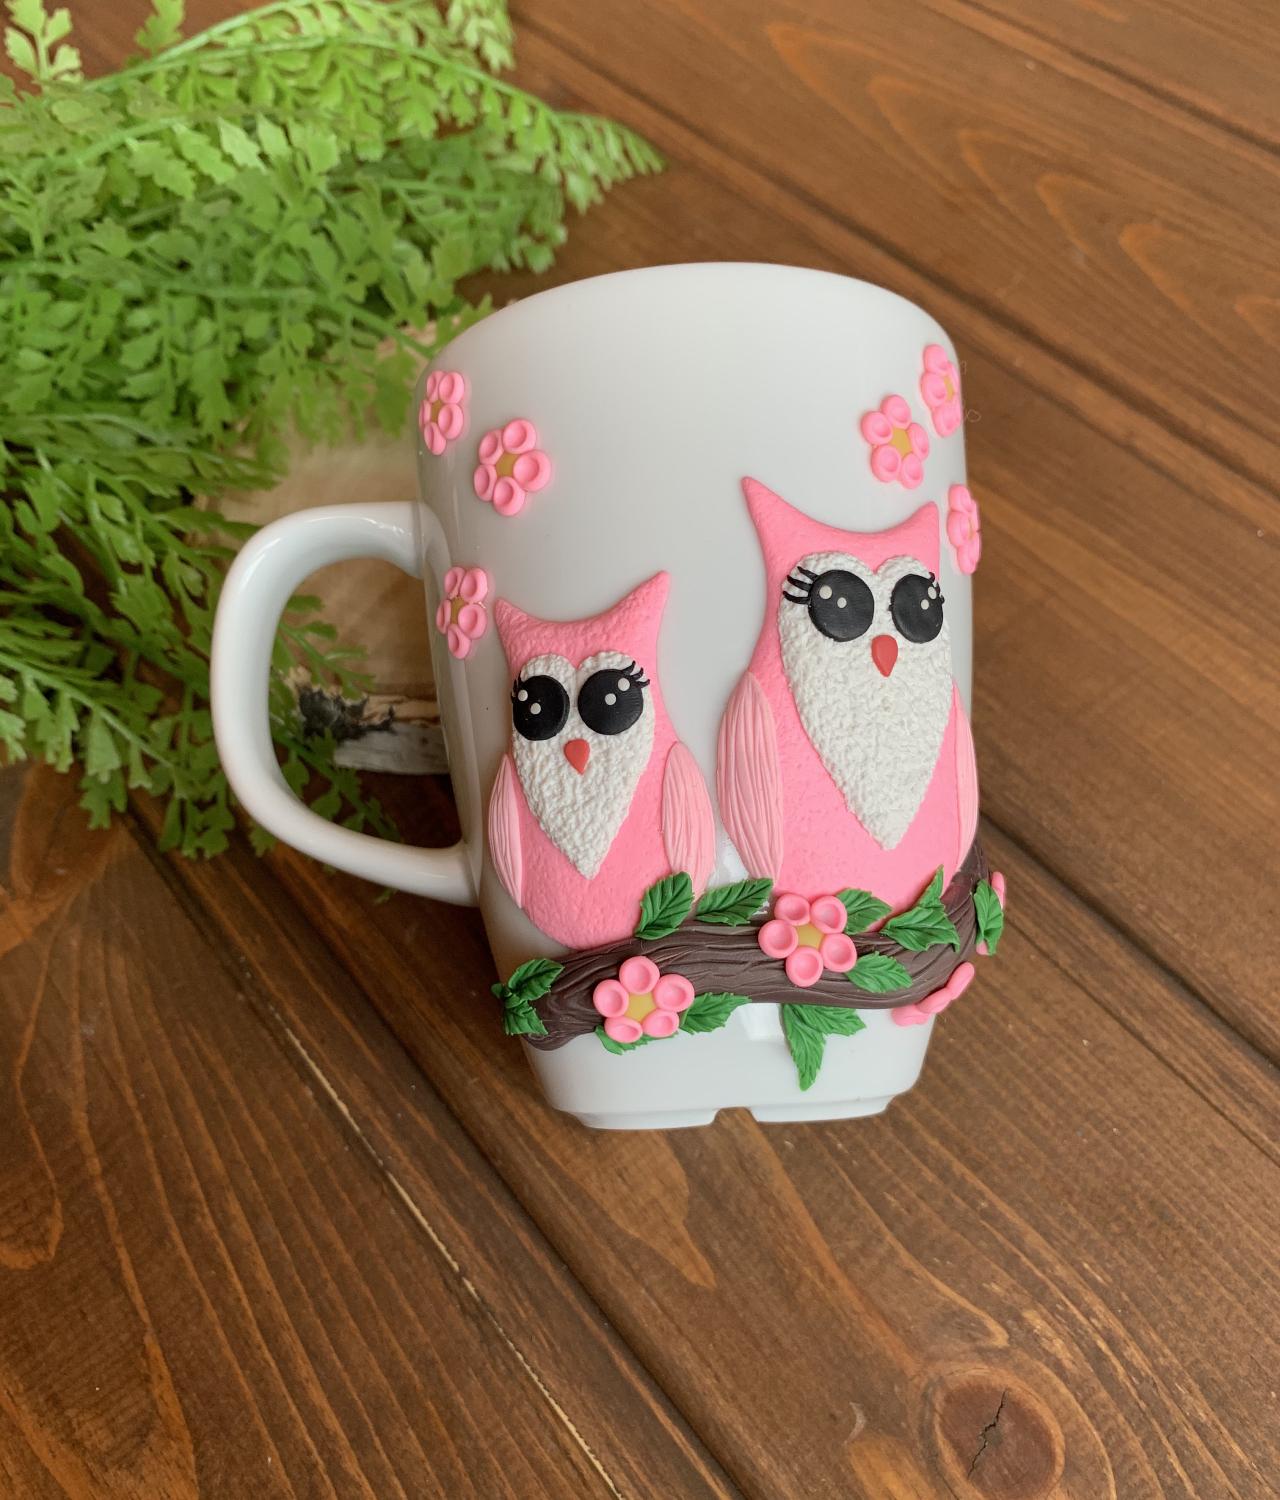 Owl Mugs, Coffee Cup Gift for Owl lover, Gifts for children, cute couple of owls, gift mug for girls, decorated cup, romantic mug gift.